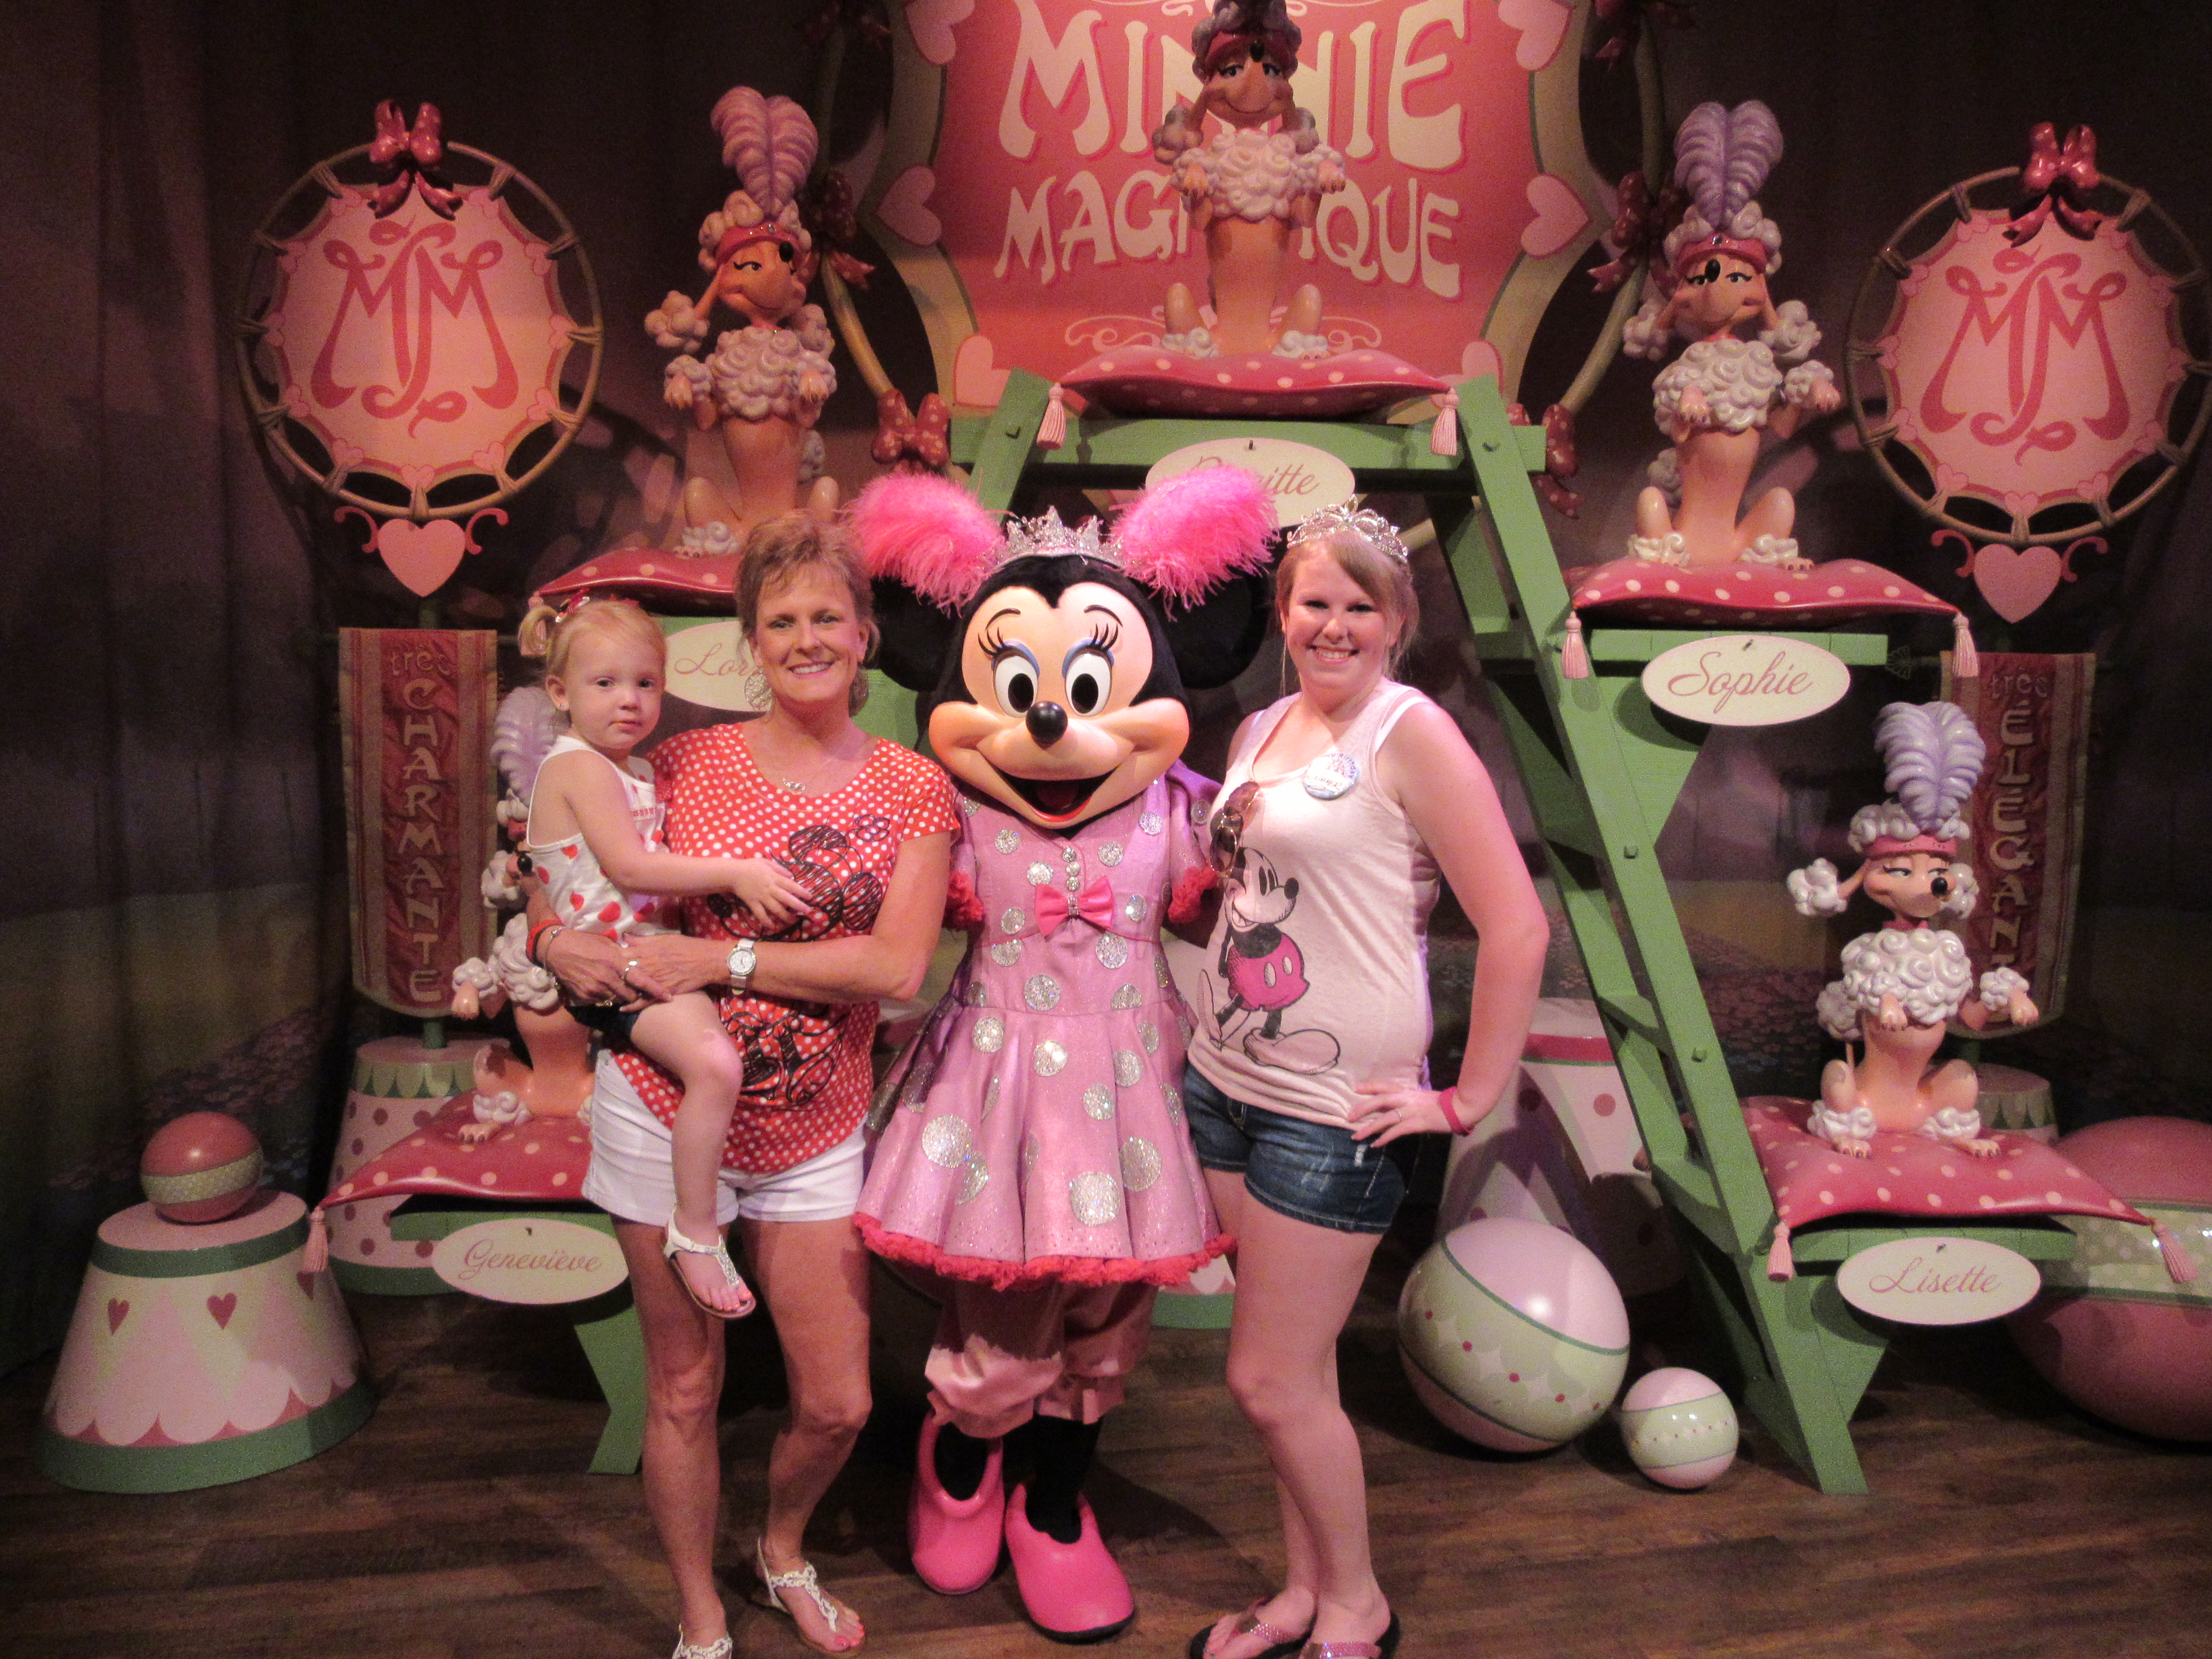 My trip to WDW with a Toddler Part 2